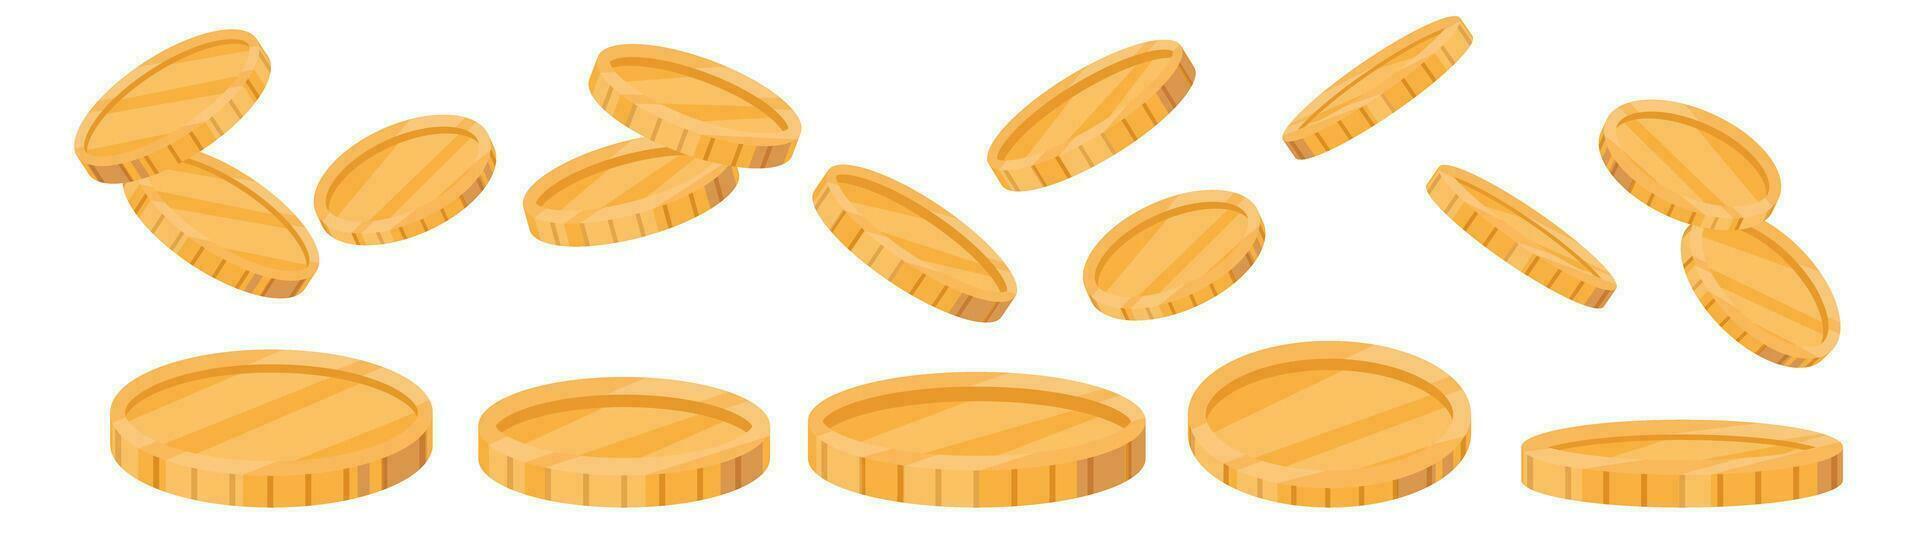 shining gold coin 3d flat icon vector